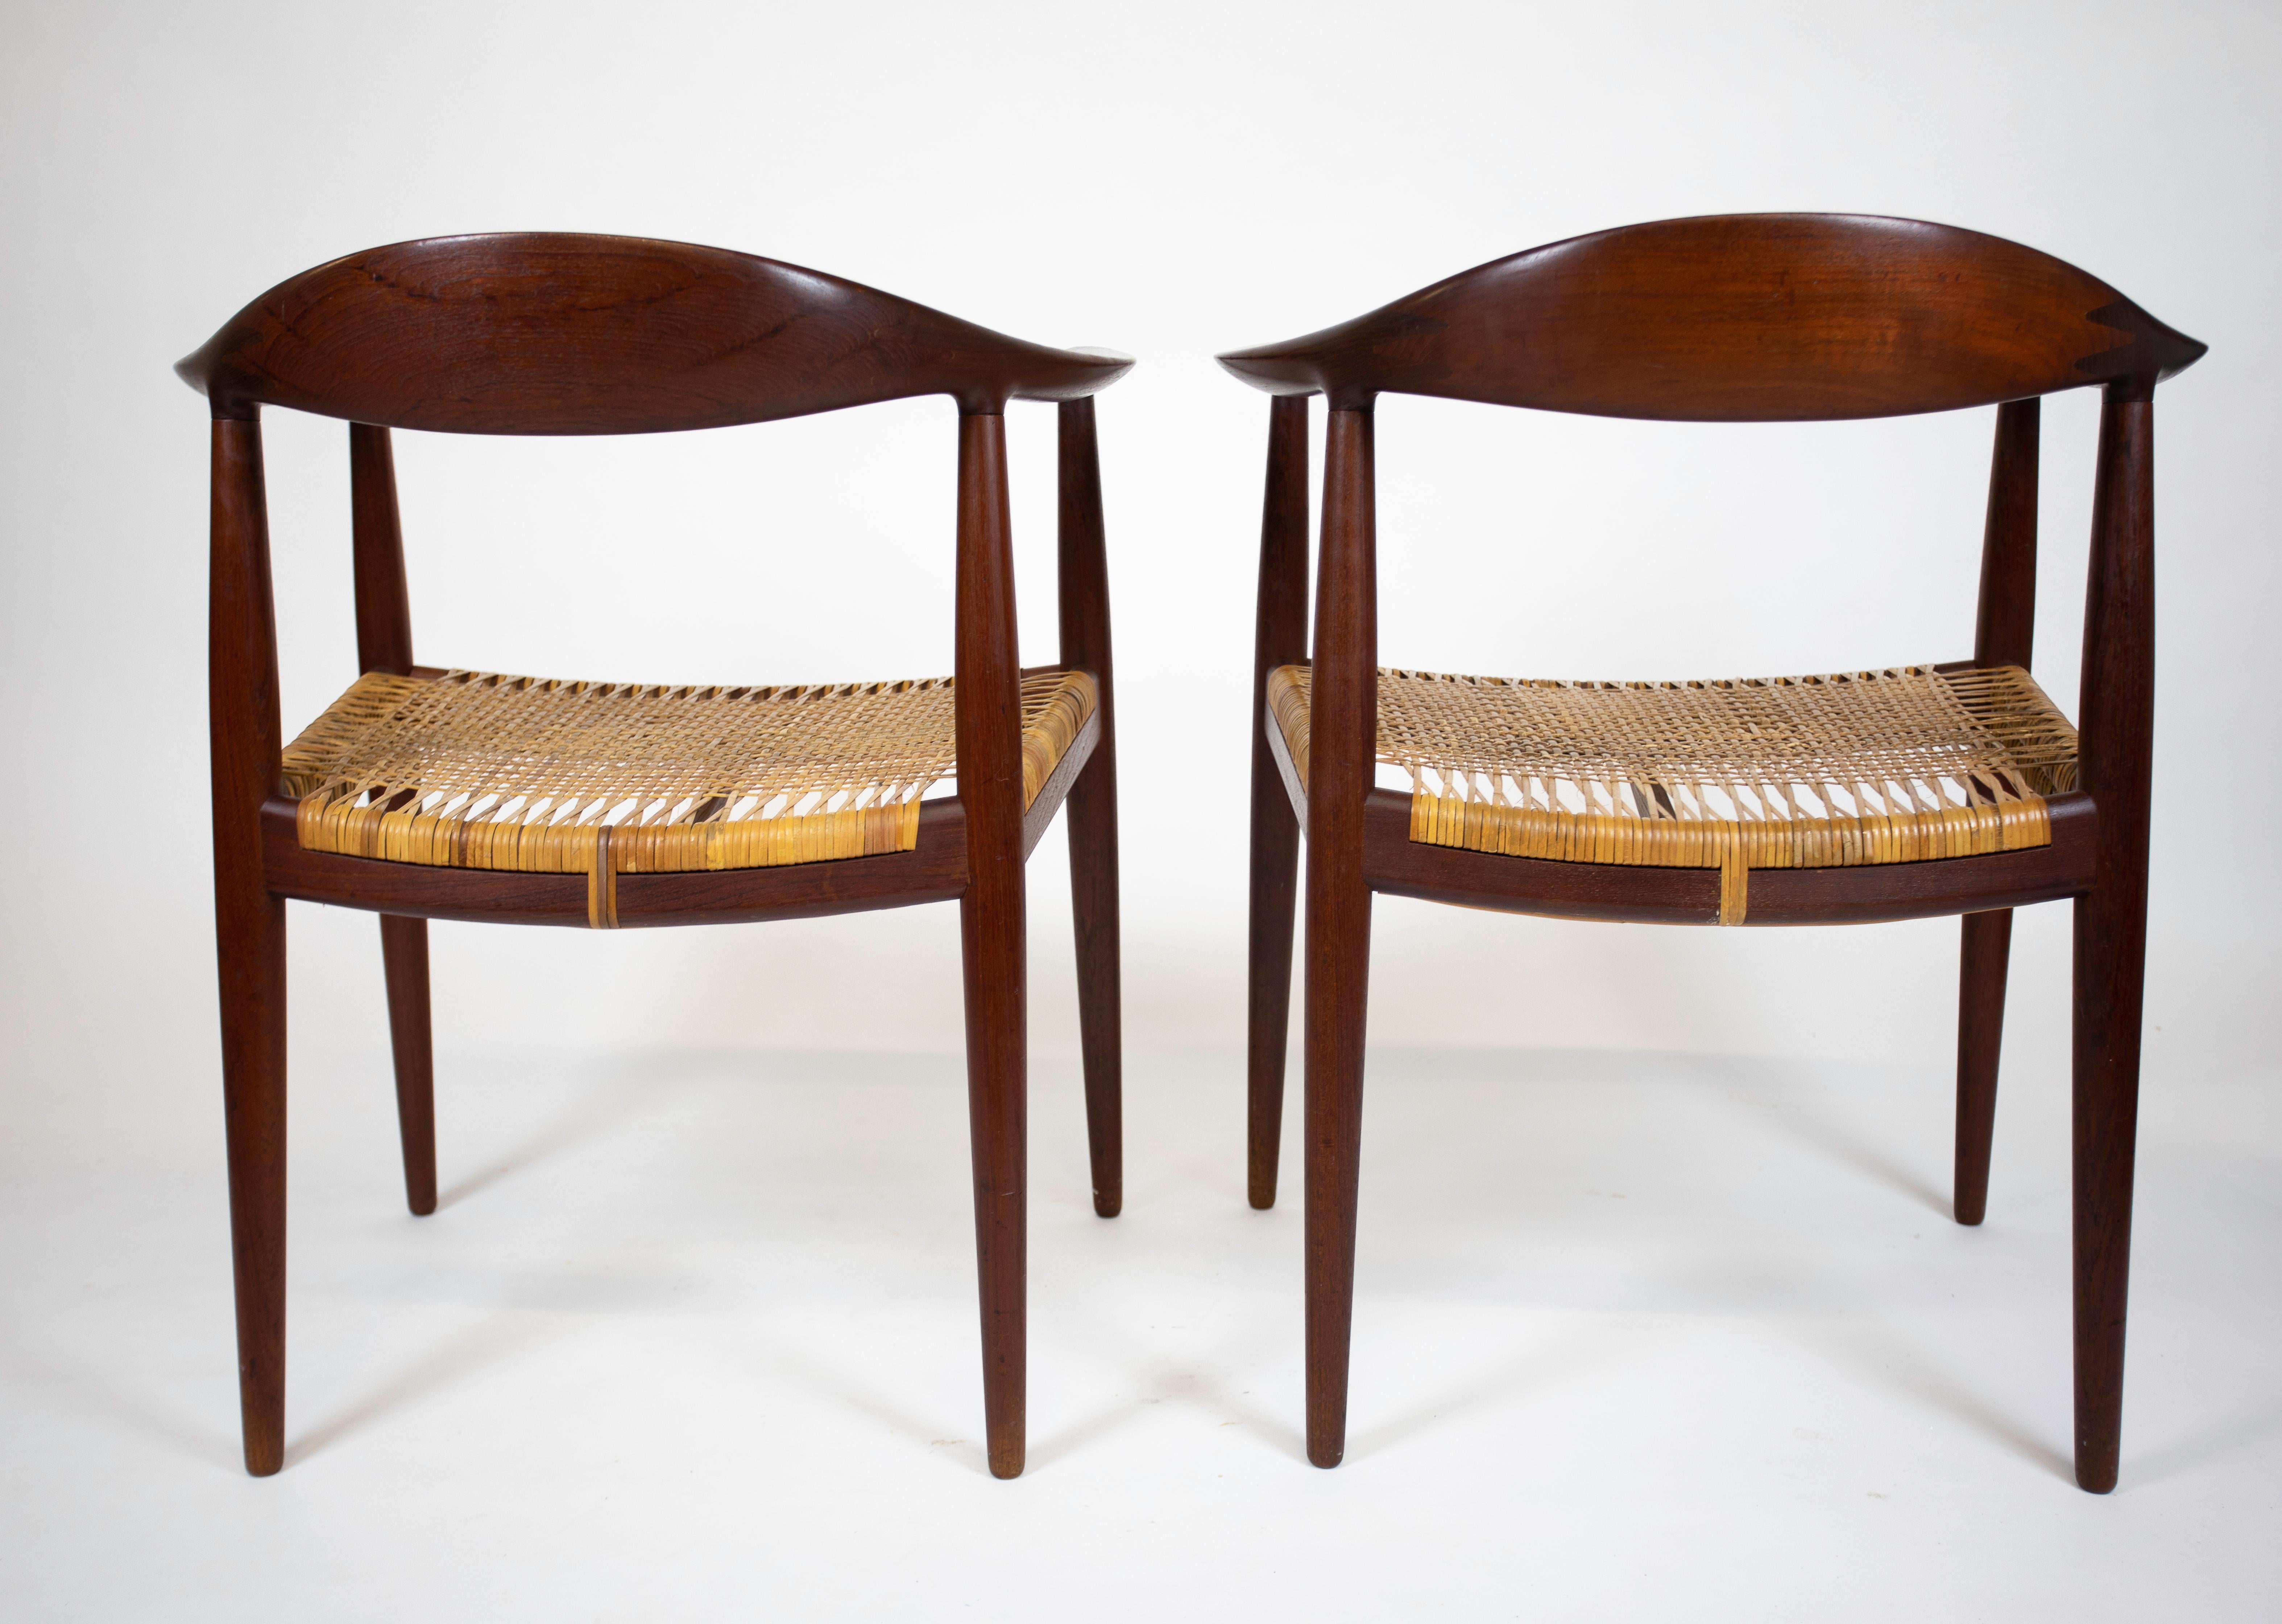 Hans J Wegner Pair of Chairs In Good Condition For Sale In West Palm Beach, FL